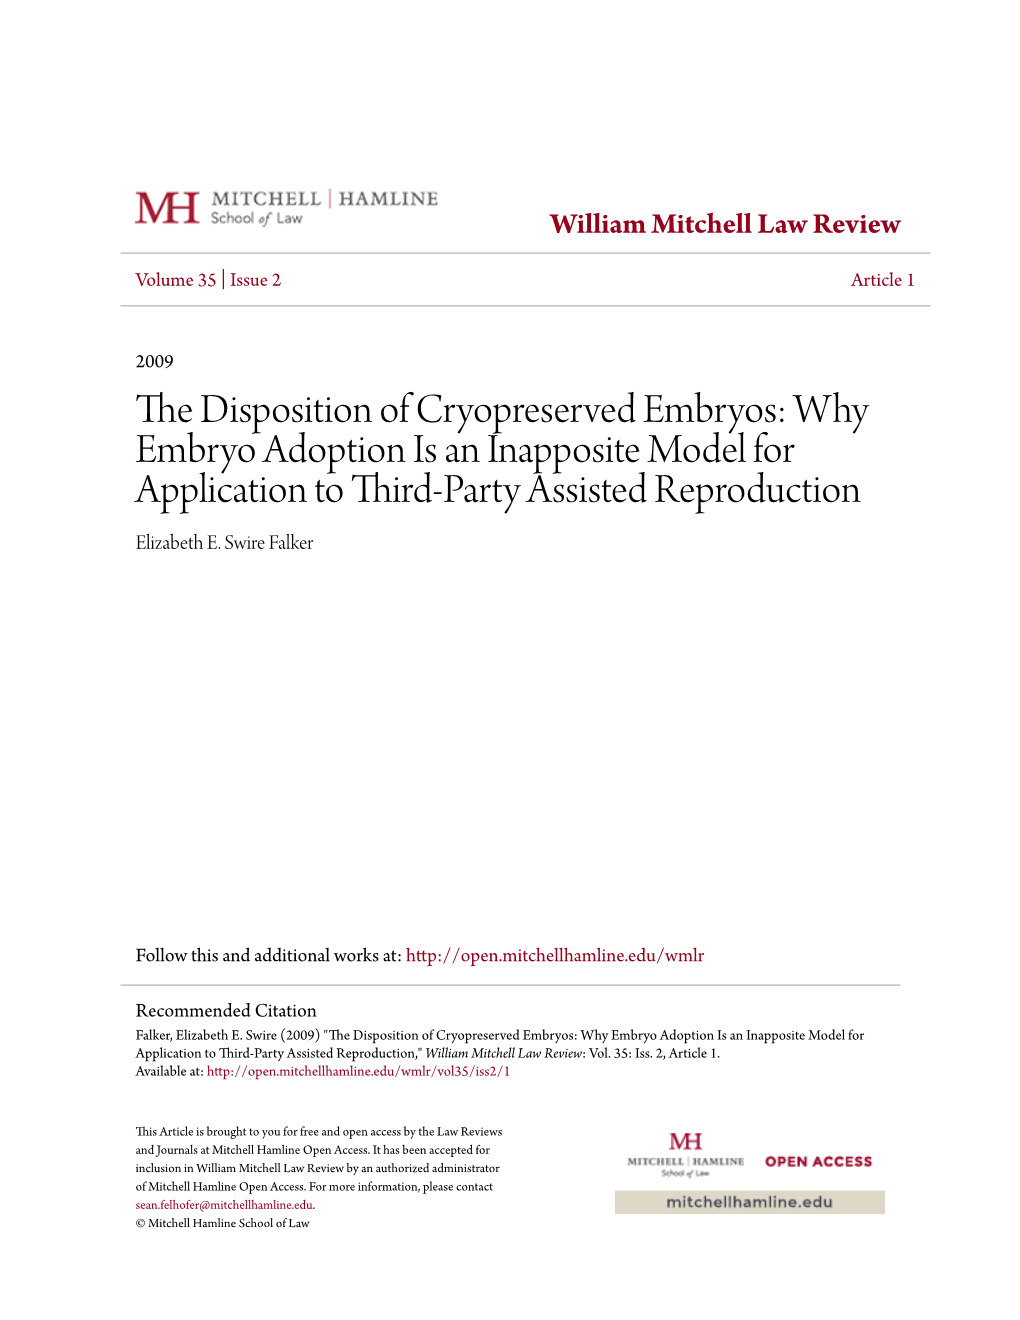 The Disposition of Cryopreserved Embryos: Why Embryo Adoption Is an Inapposite Model for Application to Third-Party Assisted Reproduction Elizabeth E